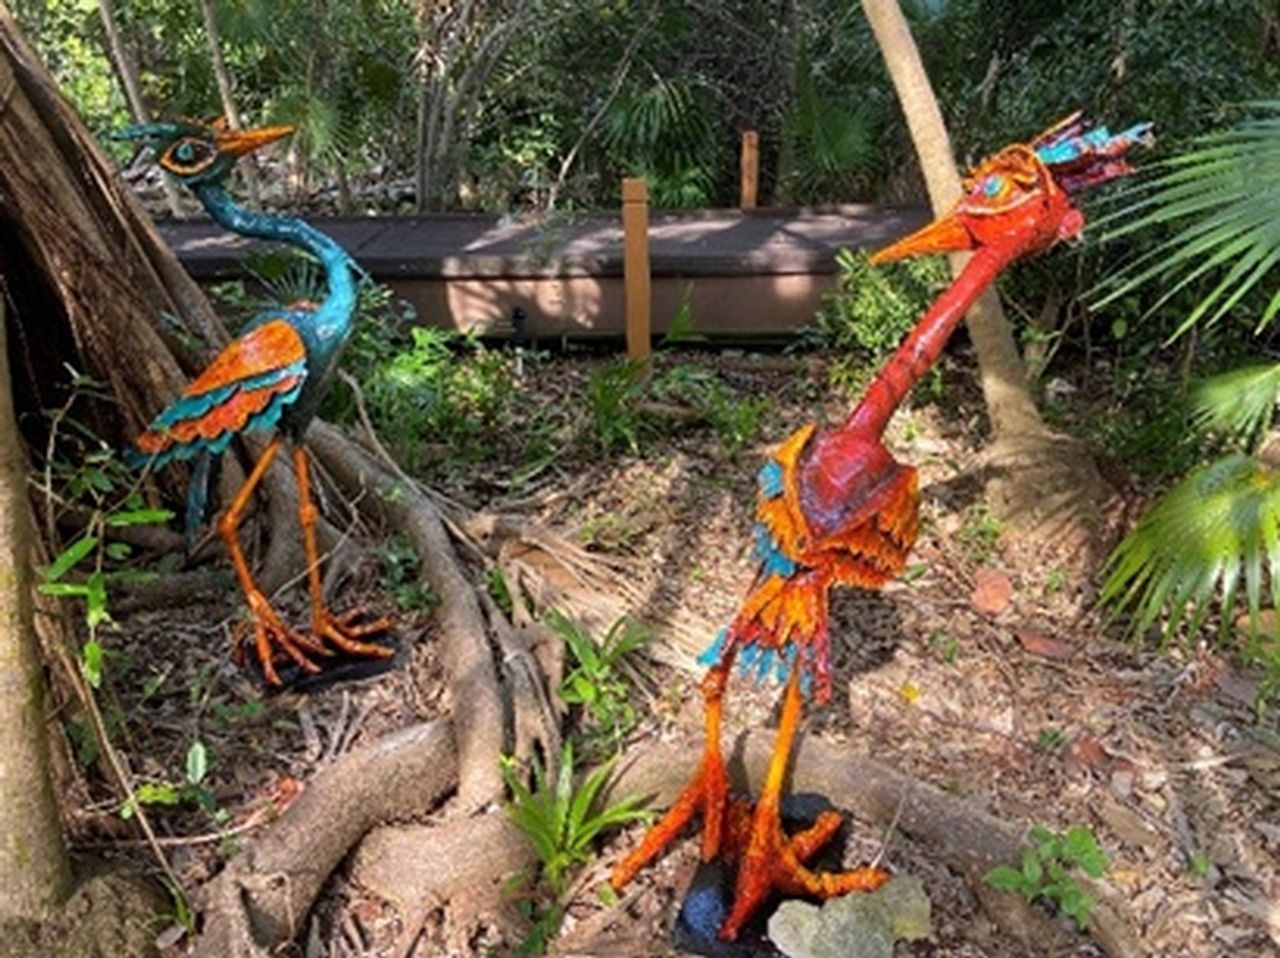 The Art in the Garden exhibition features large outdoor pieces crafted from natural, repurposed and recycled materials installed among the garden's boardwalks, trails and hidden glades. 